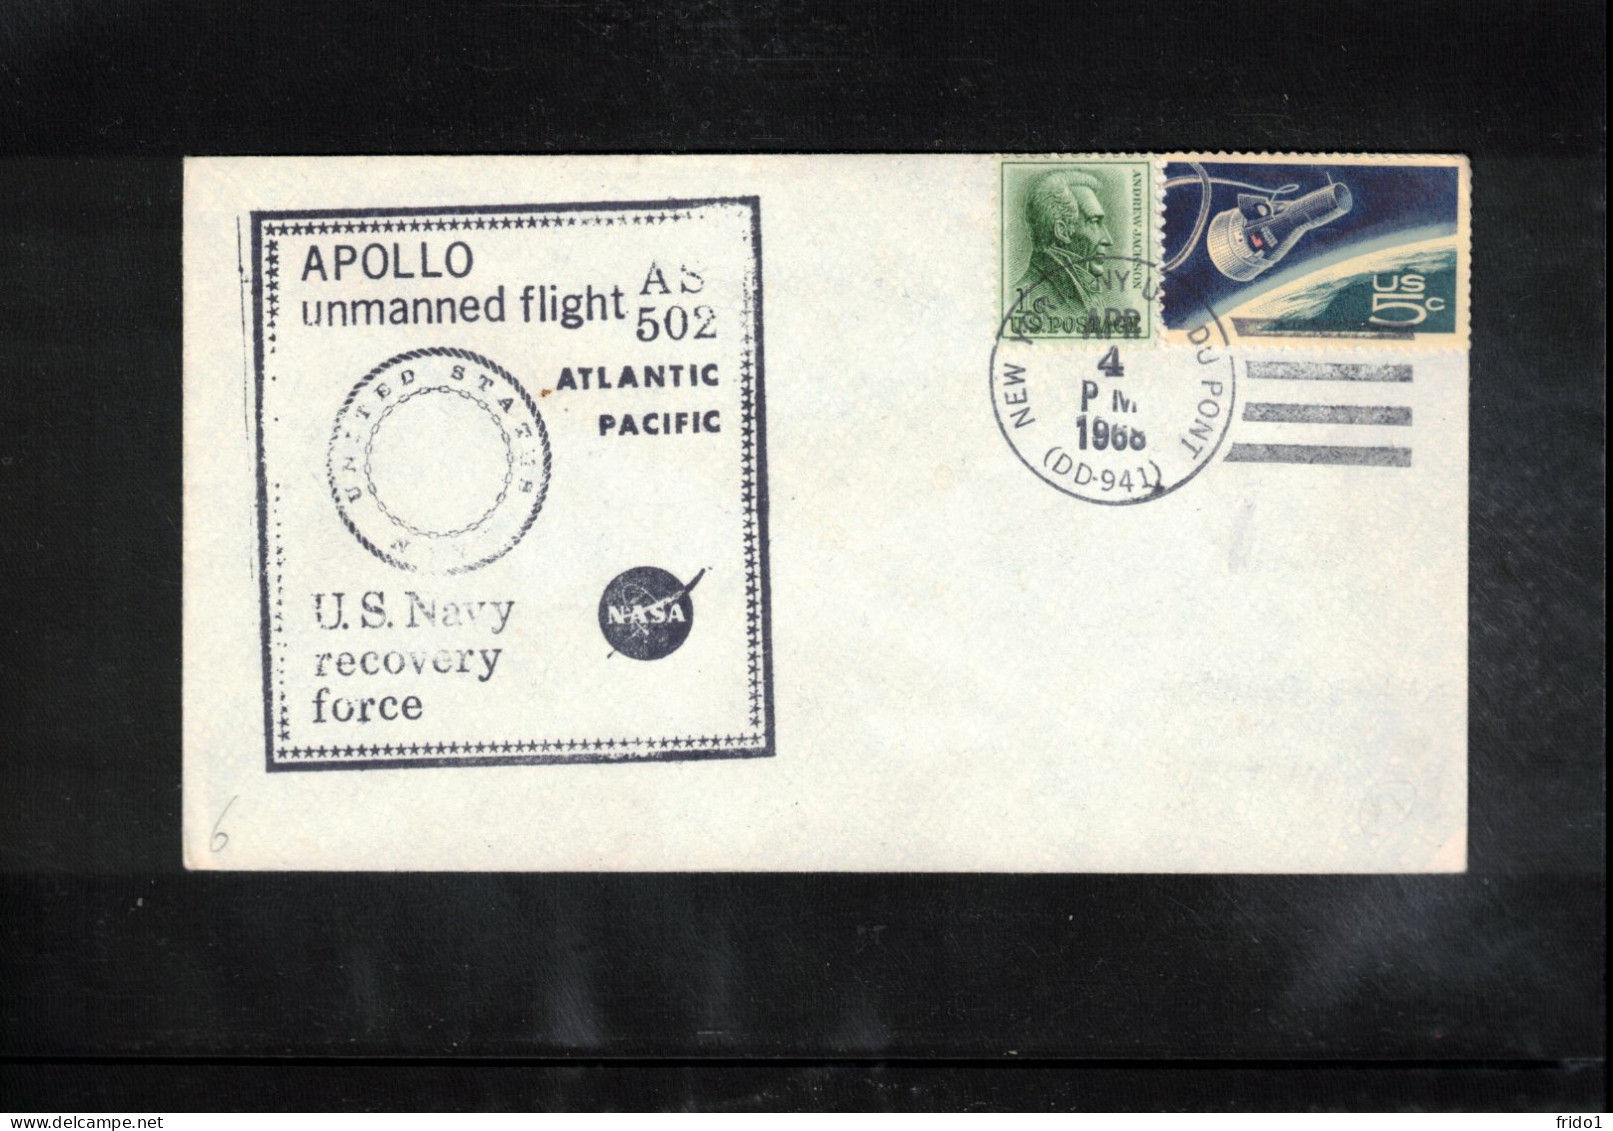 USA 1968 Space / Weltraum Apollo Unmanned Flight AS 502 - US Navy Recovery Force Ship USS New York Interesting Cover - USA